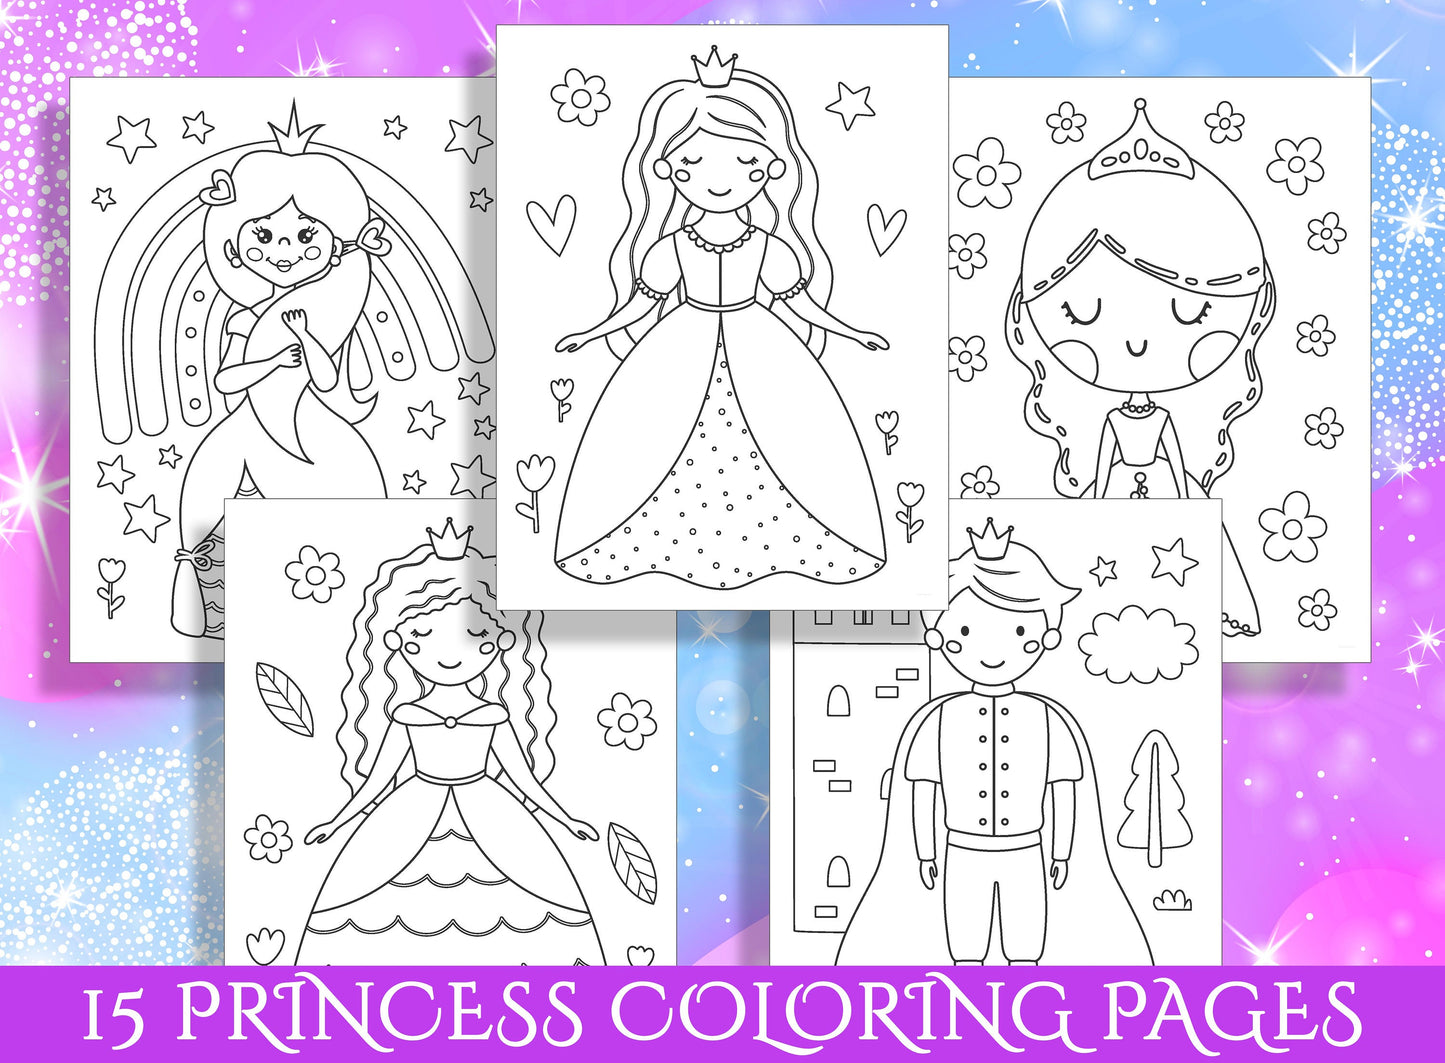 Magical Princess Coloring Pages: 15 Enchanting Designs for Preschool and Kindergarten - PDF File, Instant Download